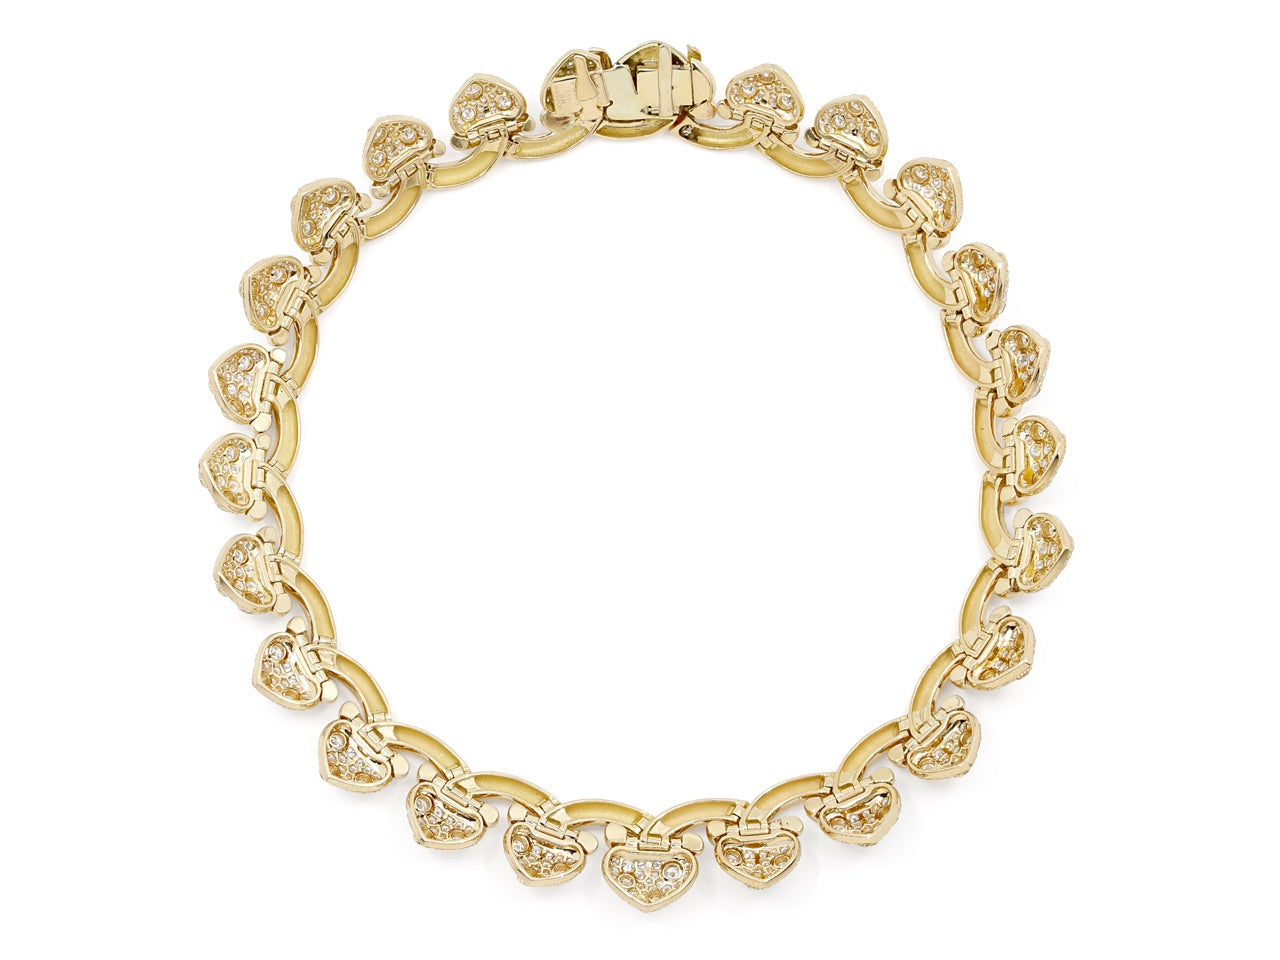 Fred Paris Diamond Necklace in 18K Gold